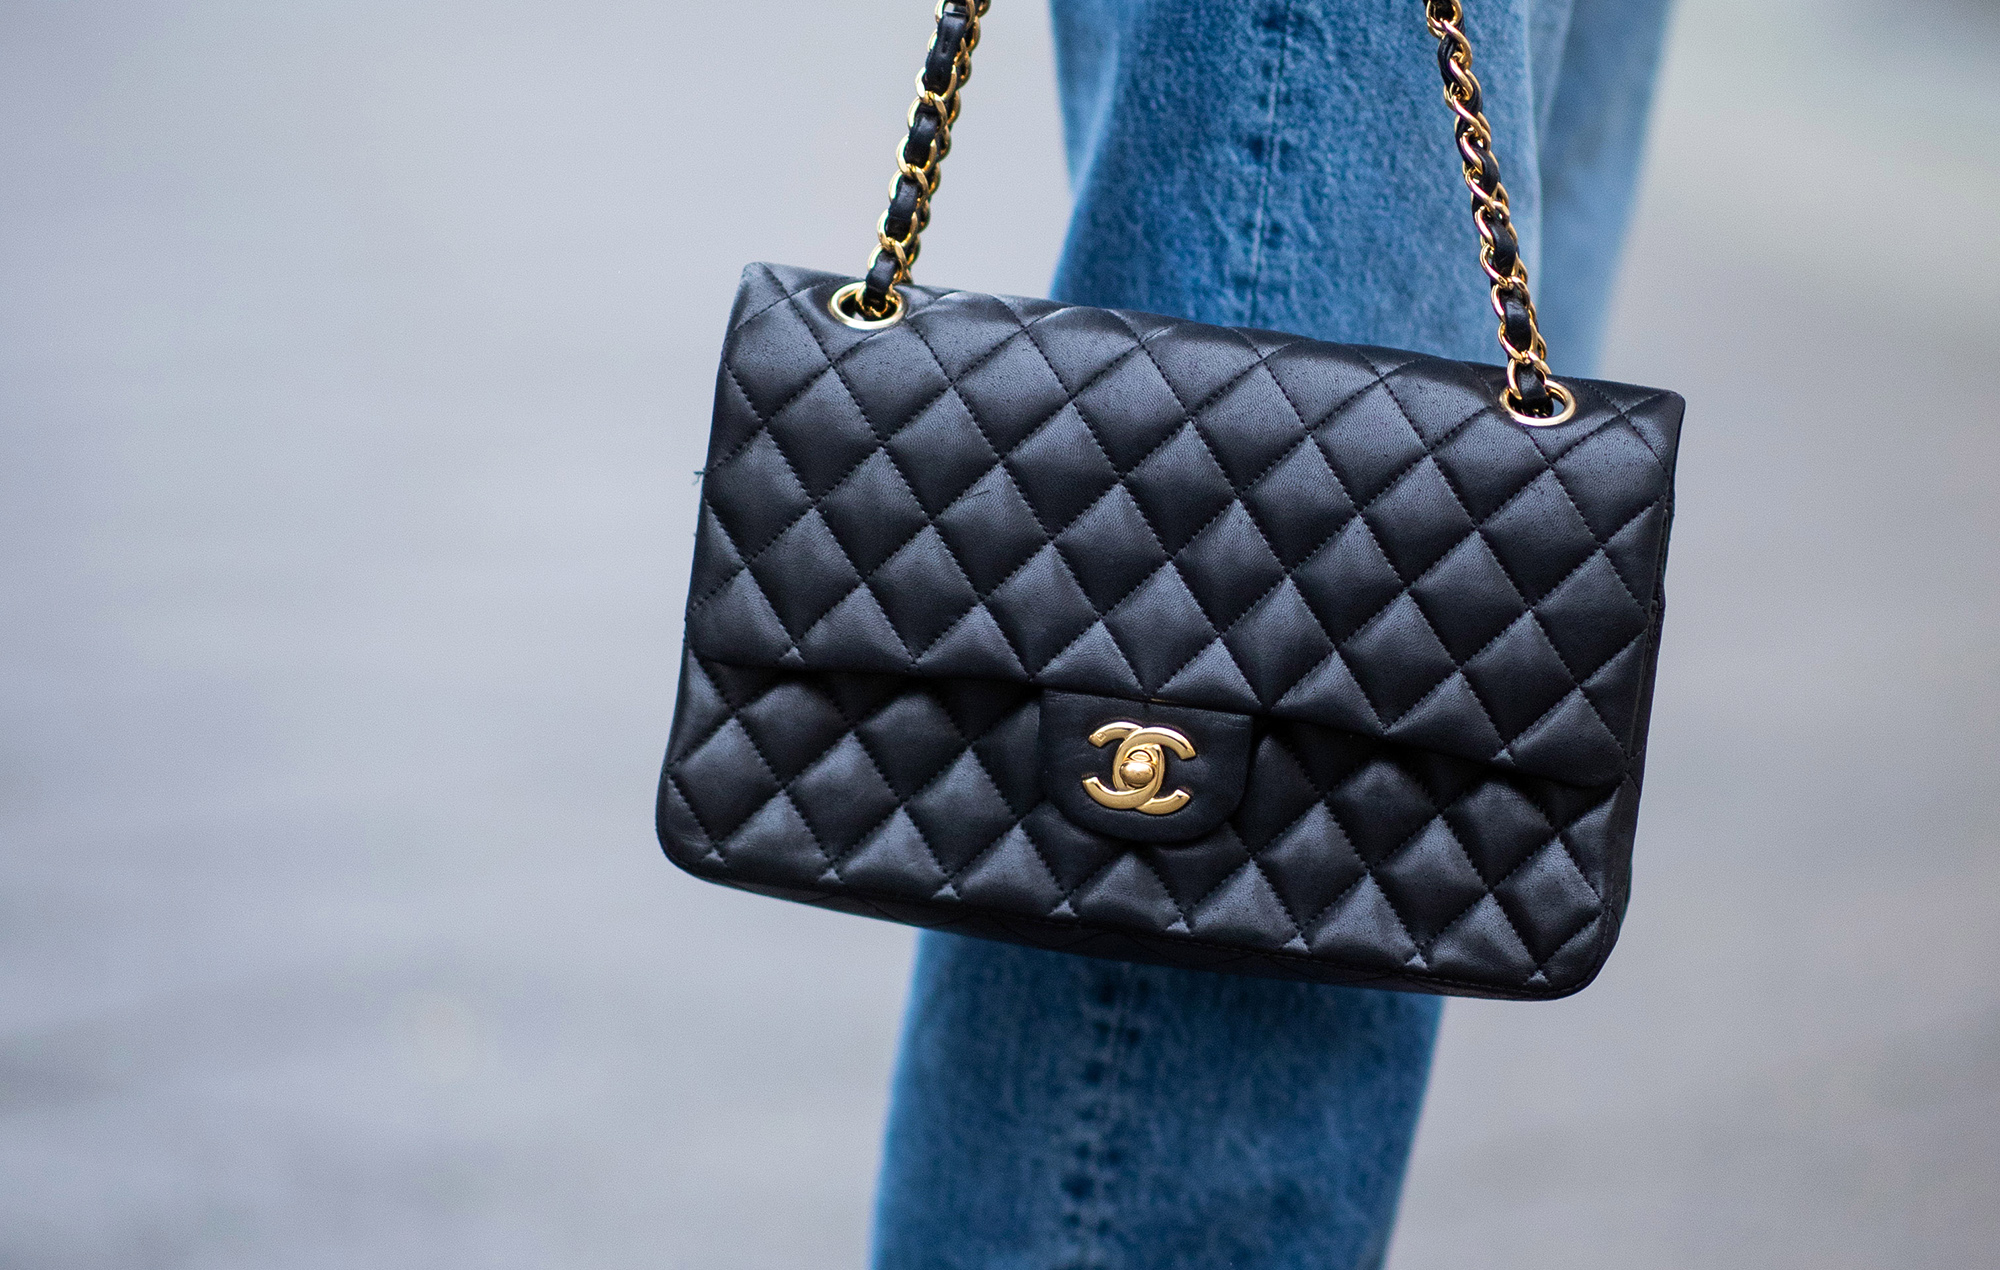 Chanel Raises China Prices in September as Luxury Demand Slows